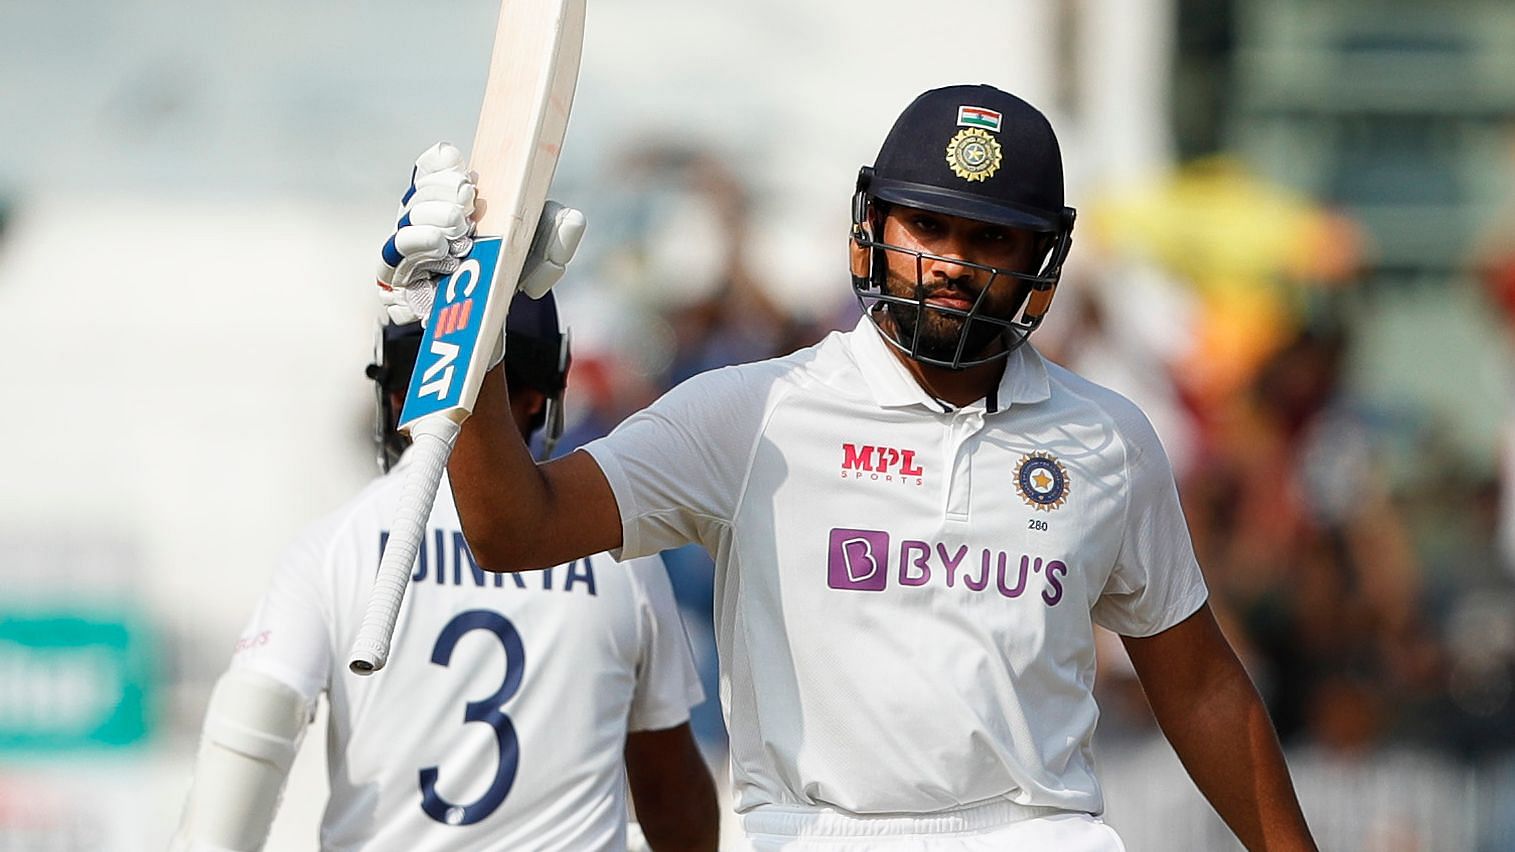 Rohit Sharma scored 161 on Day 1 of the Chennai Test against England.